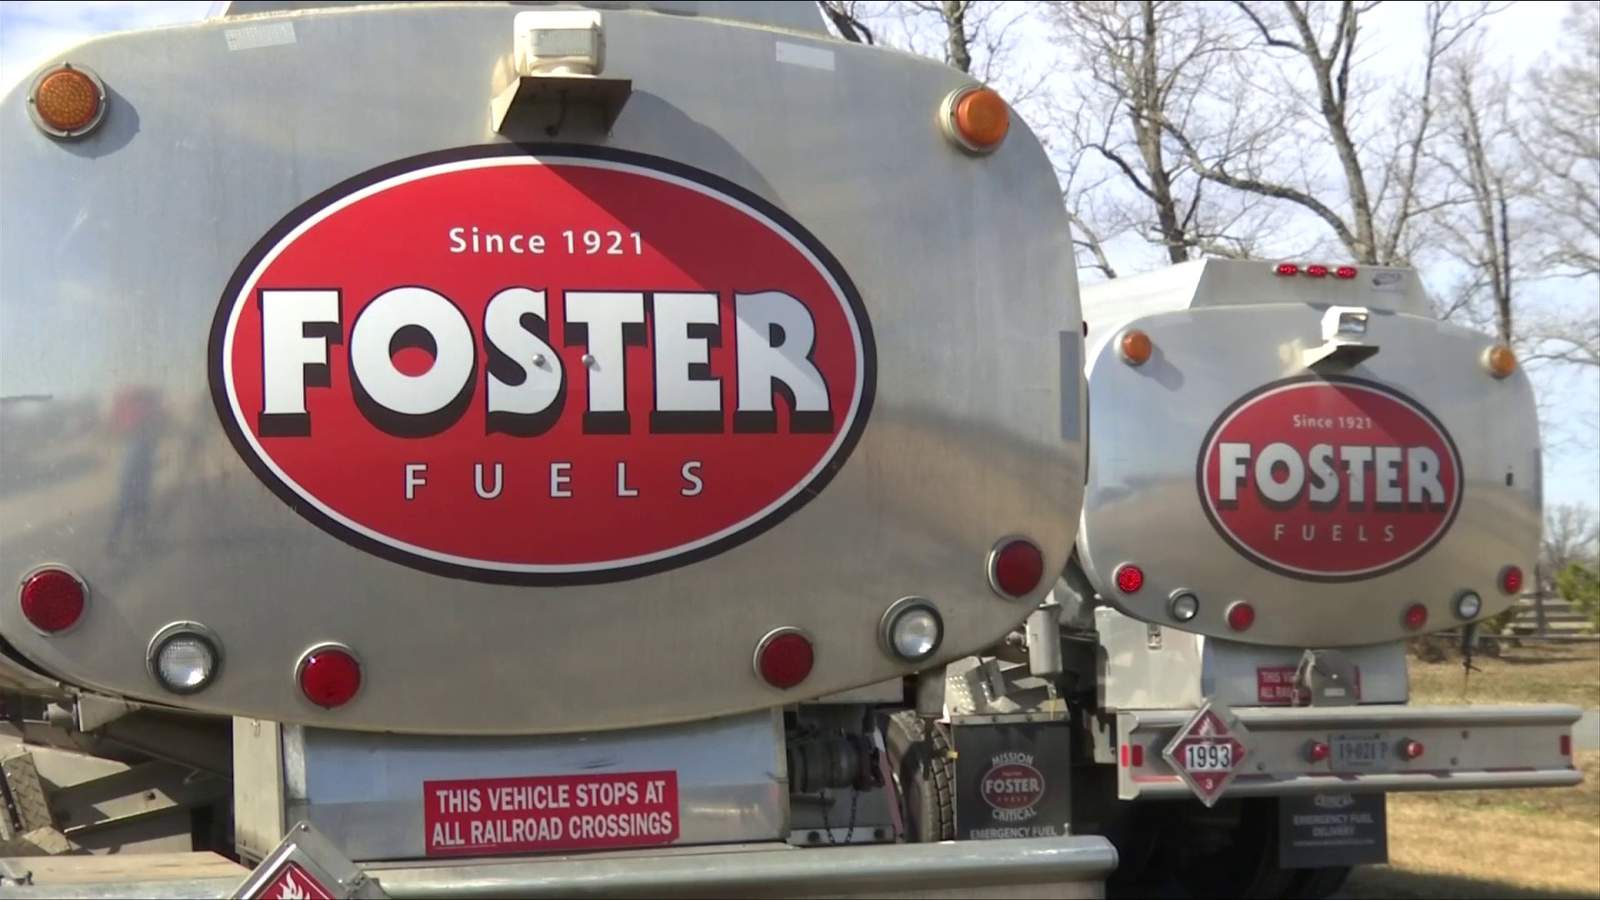 Foster Fuels provides storm relief both in and out of Virginia